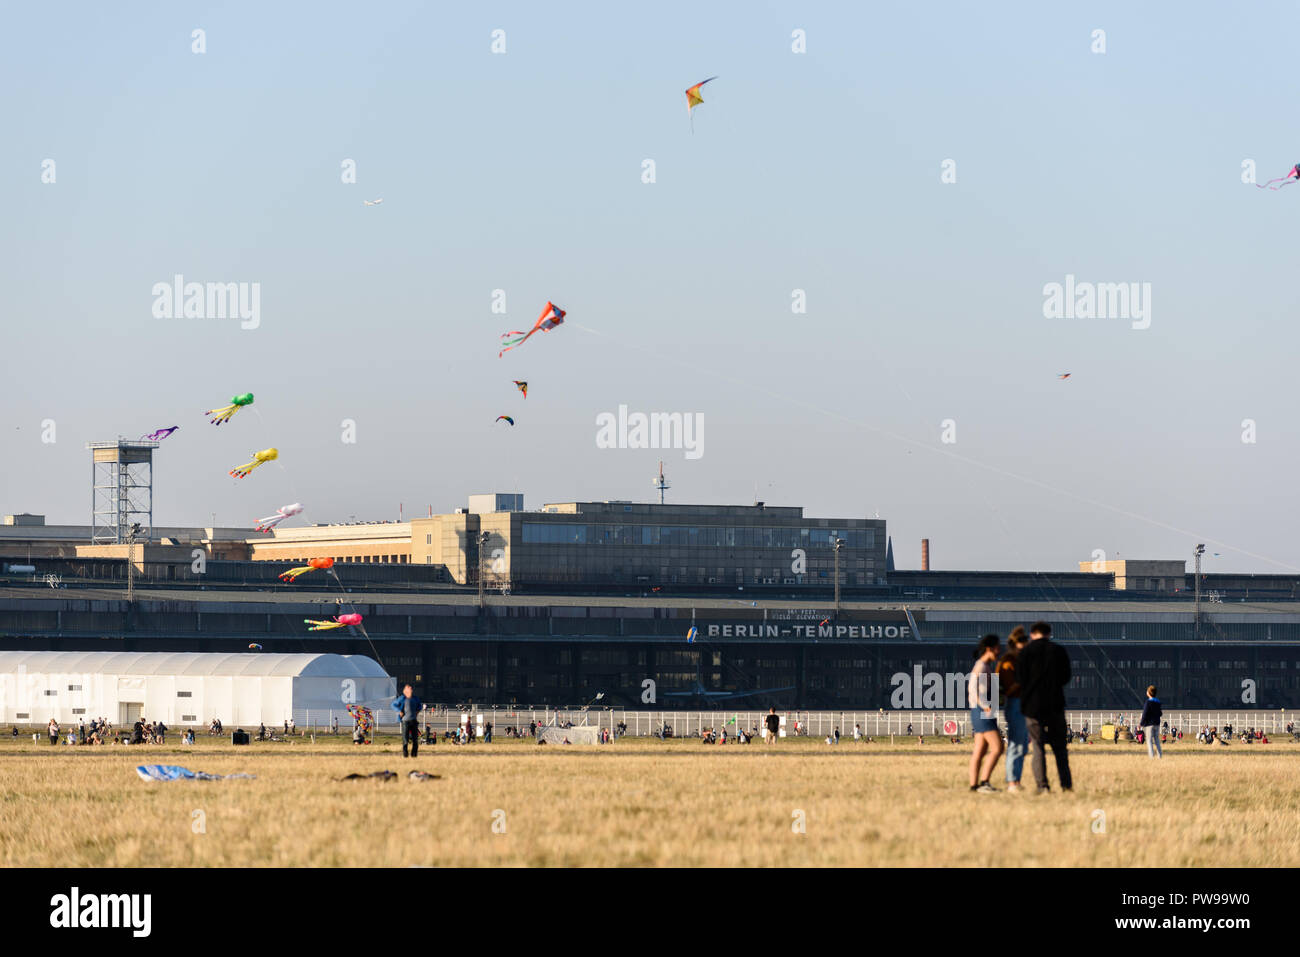 Berlin, Germany. 14th Oct, 2018. Visitors are seen on the Tempelhof field. The good weather in October brings many visitors to the park at the former Tempelhof Airport. Credit: Markus Heine/SOPA Images/ZUMA Wire/Alamy Live News Stock Photo